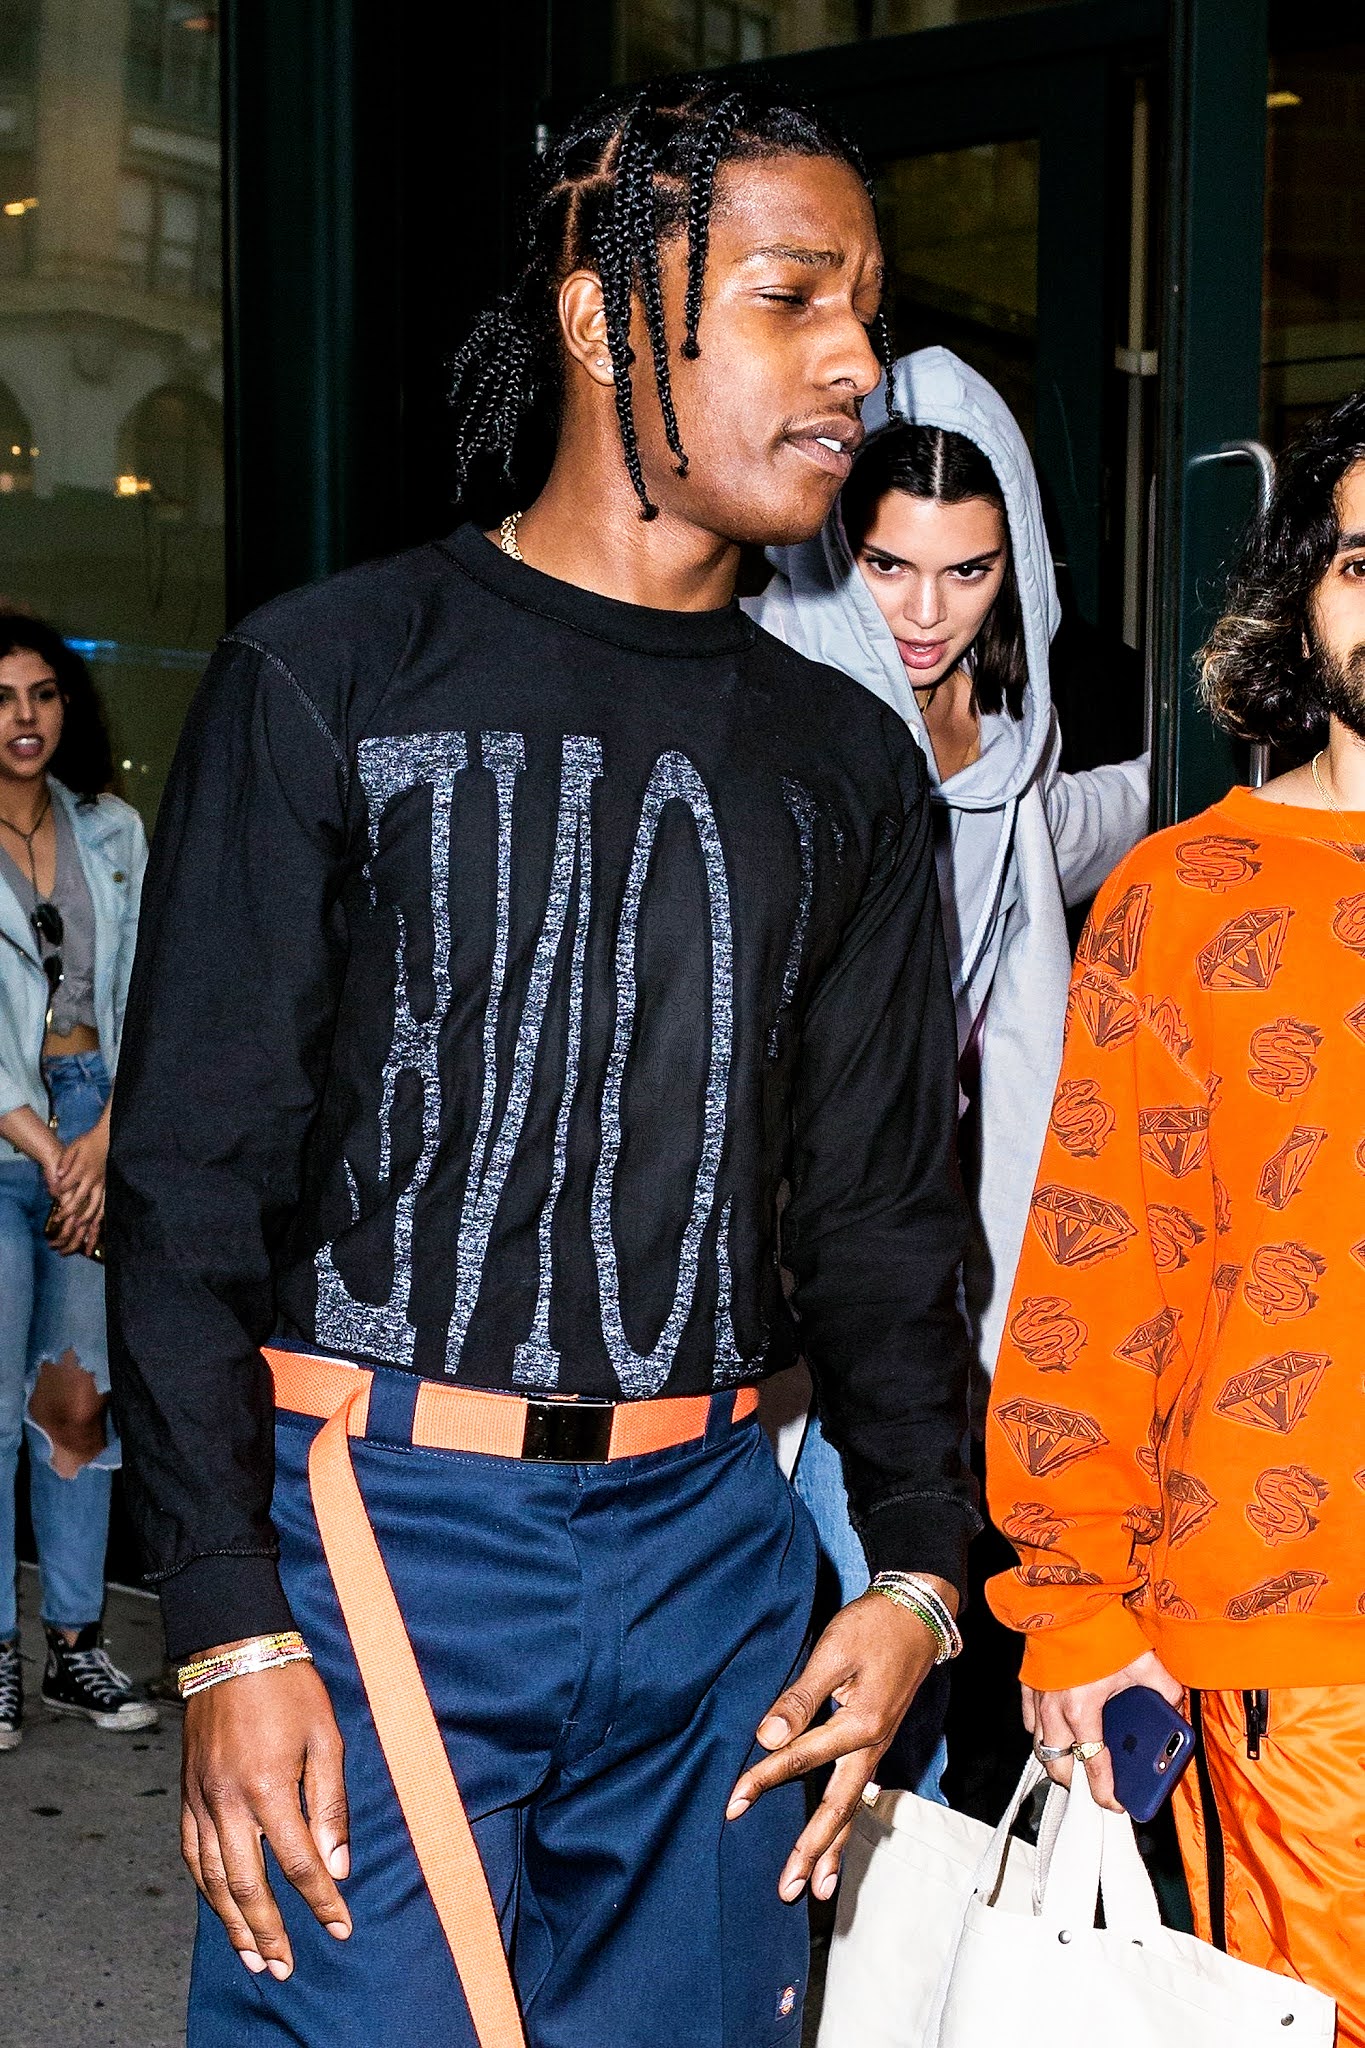 Jun 6th 2017 With ASAP Rocky Leaving Kanye Apartment in Soho | Kendall ...